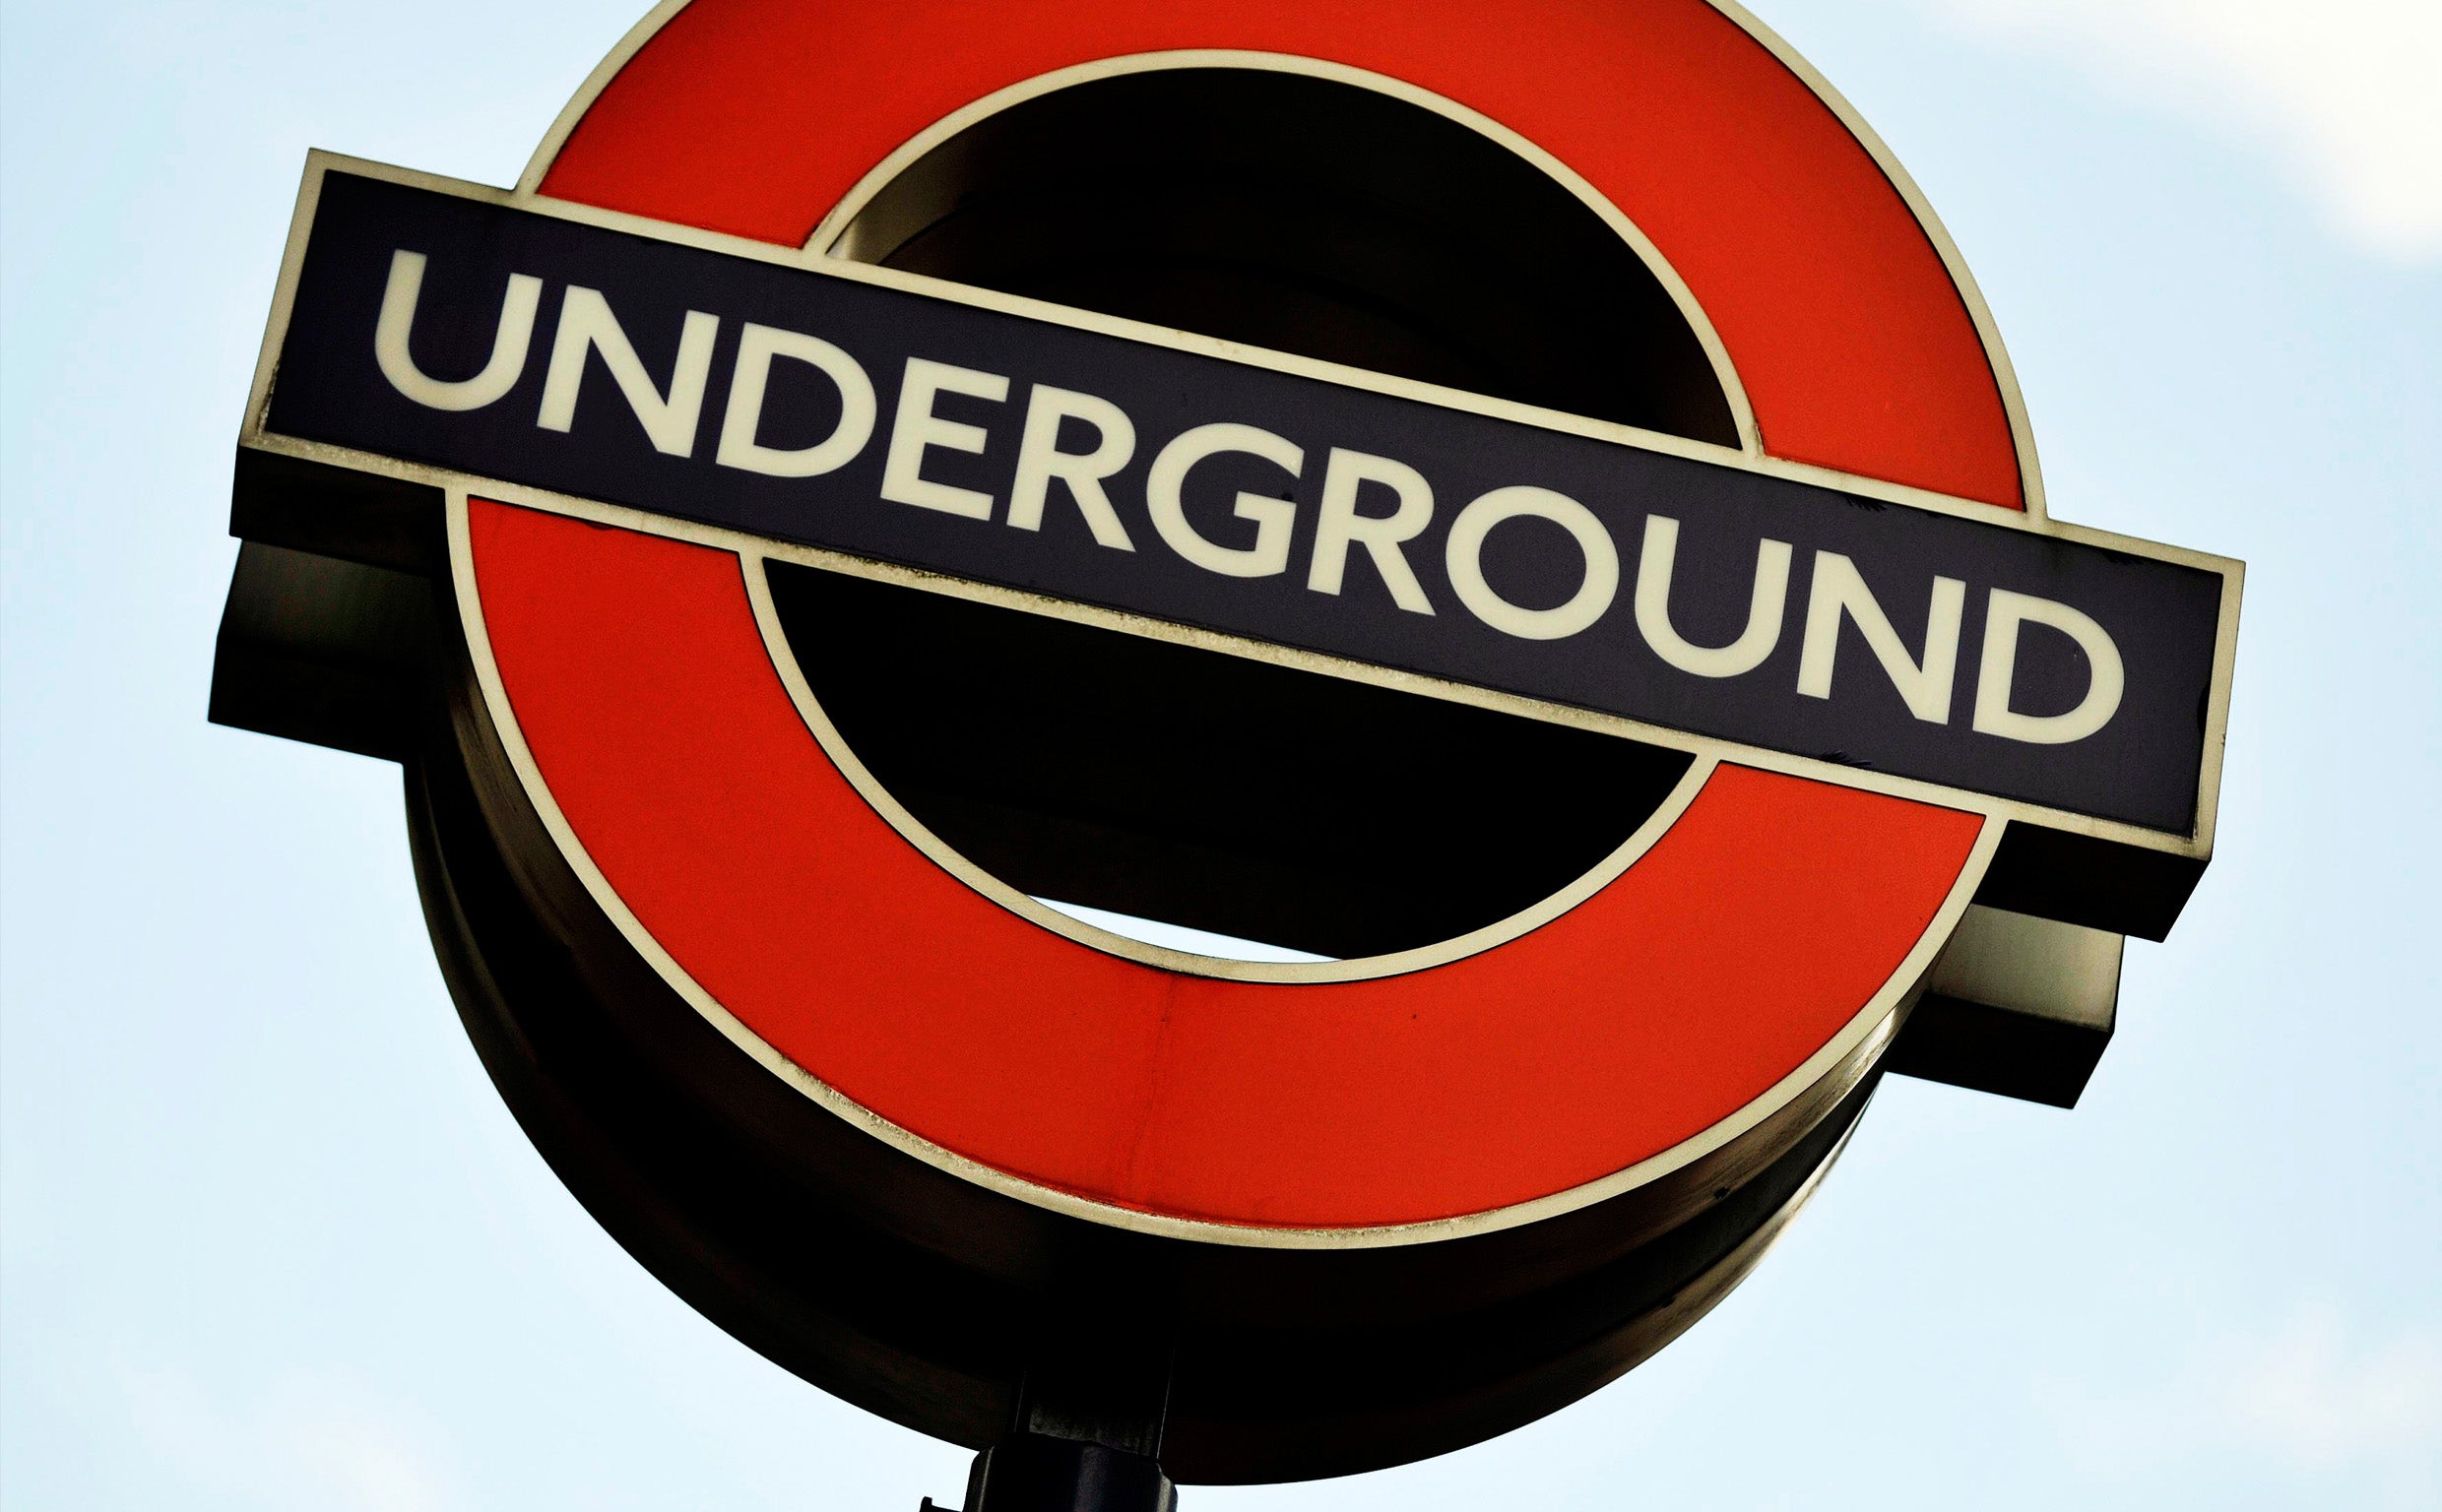 Reports of sexual offences in the Tube are on the rise